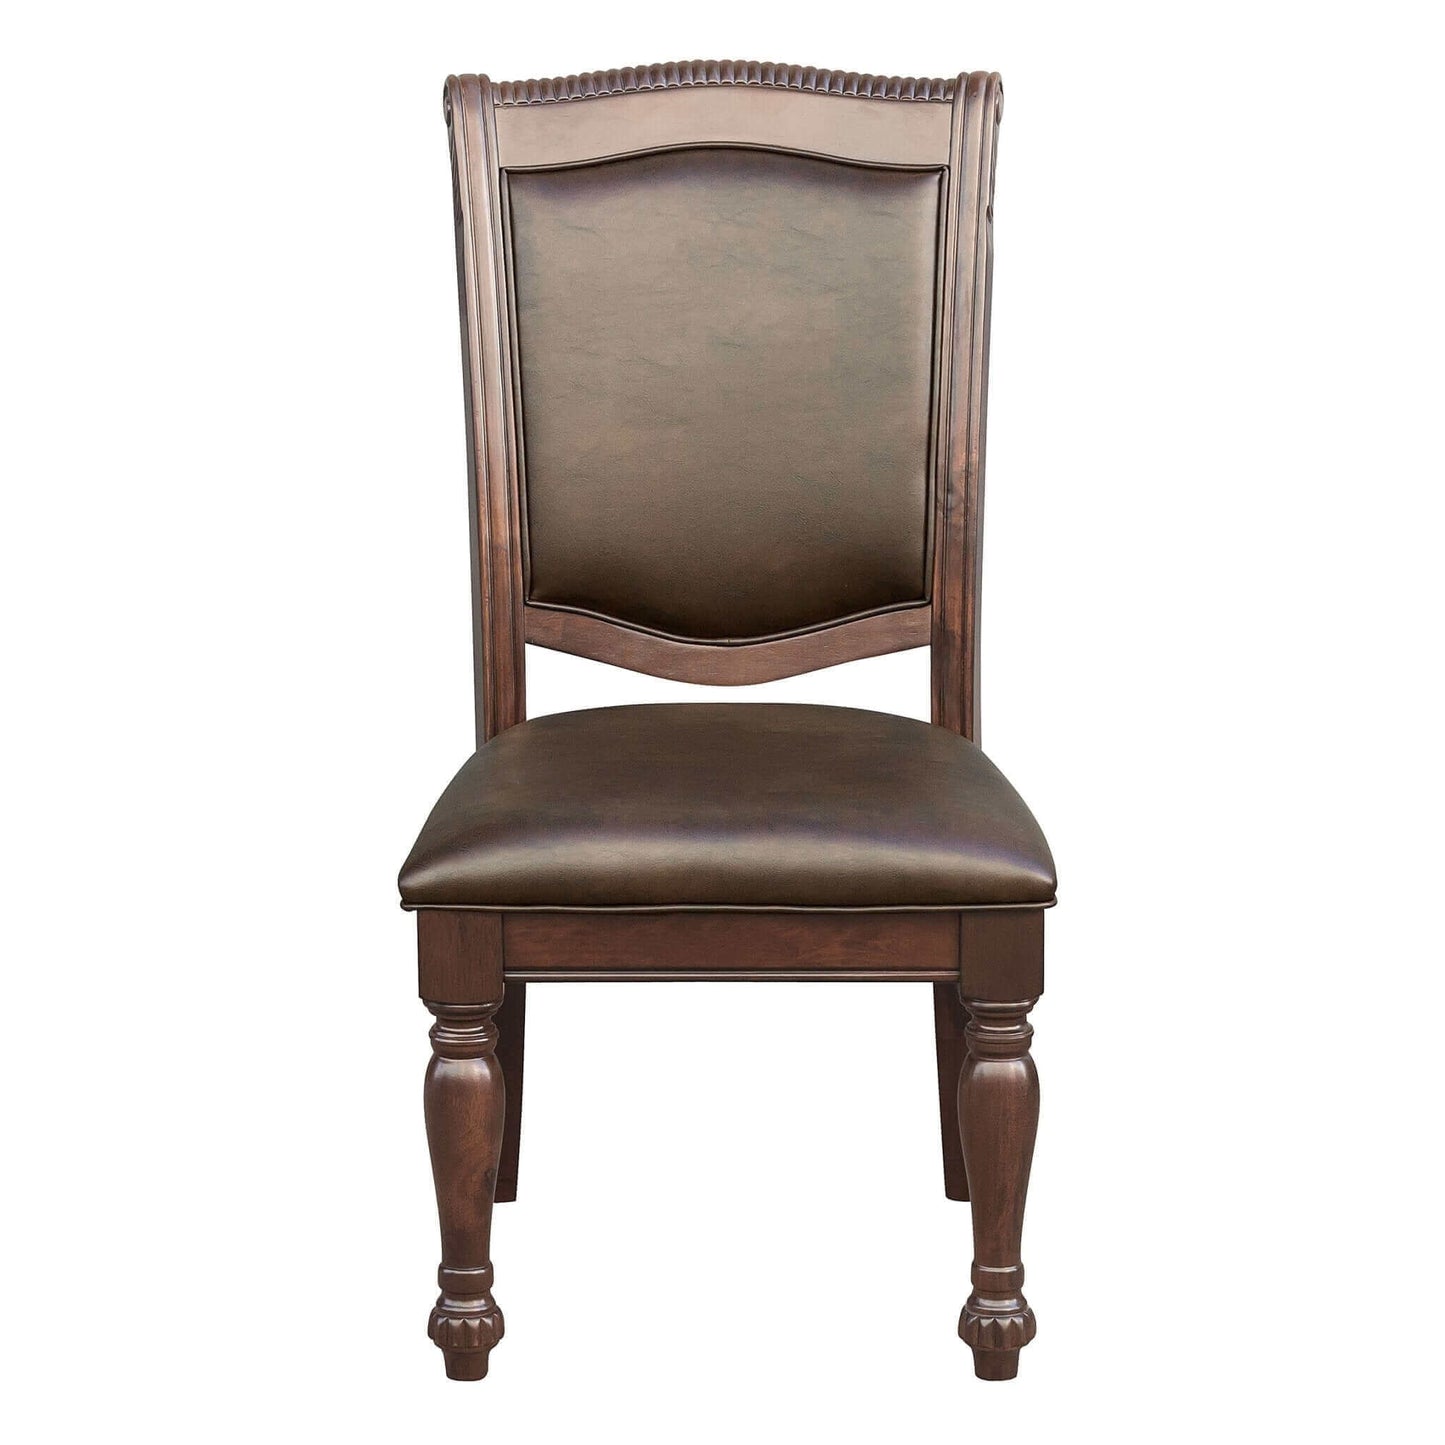 Traditional style wooden dining chair with elegant brown cherry finish and comfortable cushioned seat.